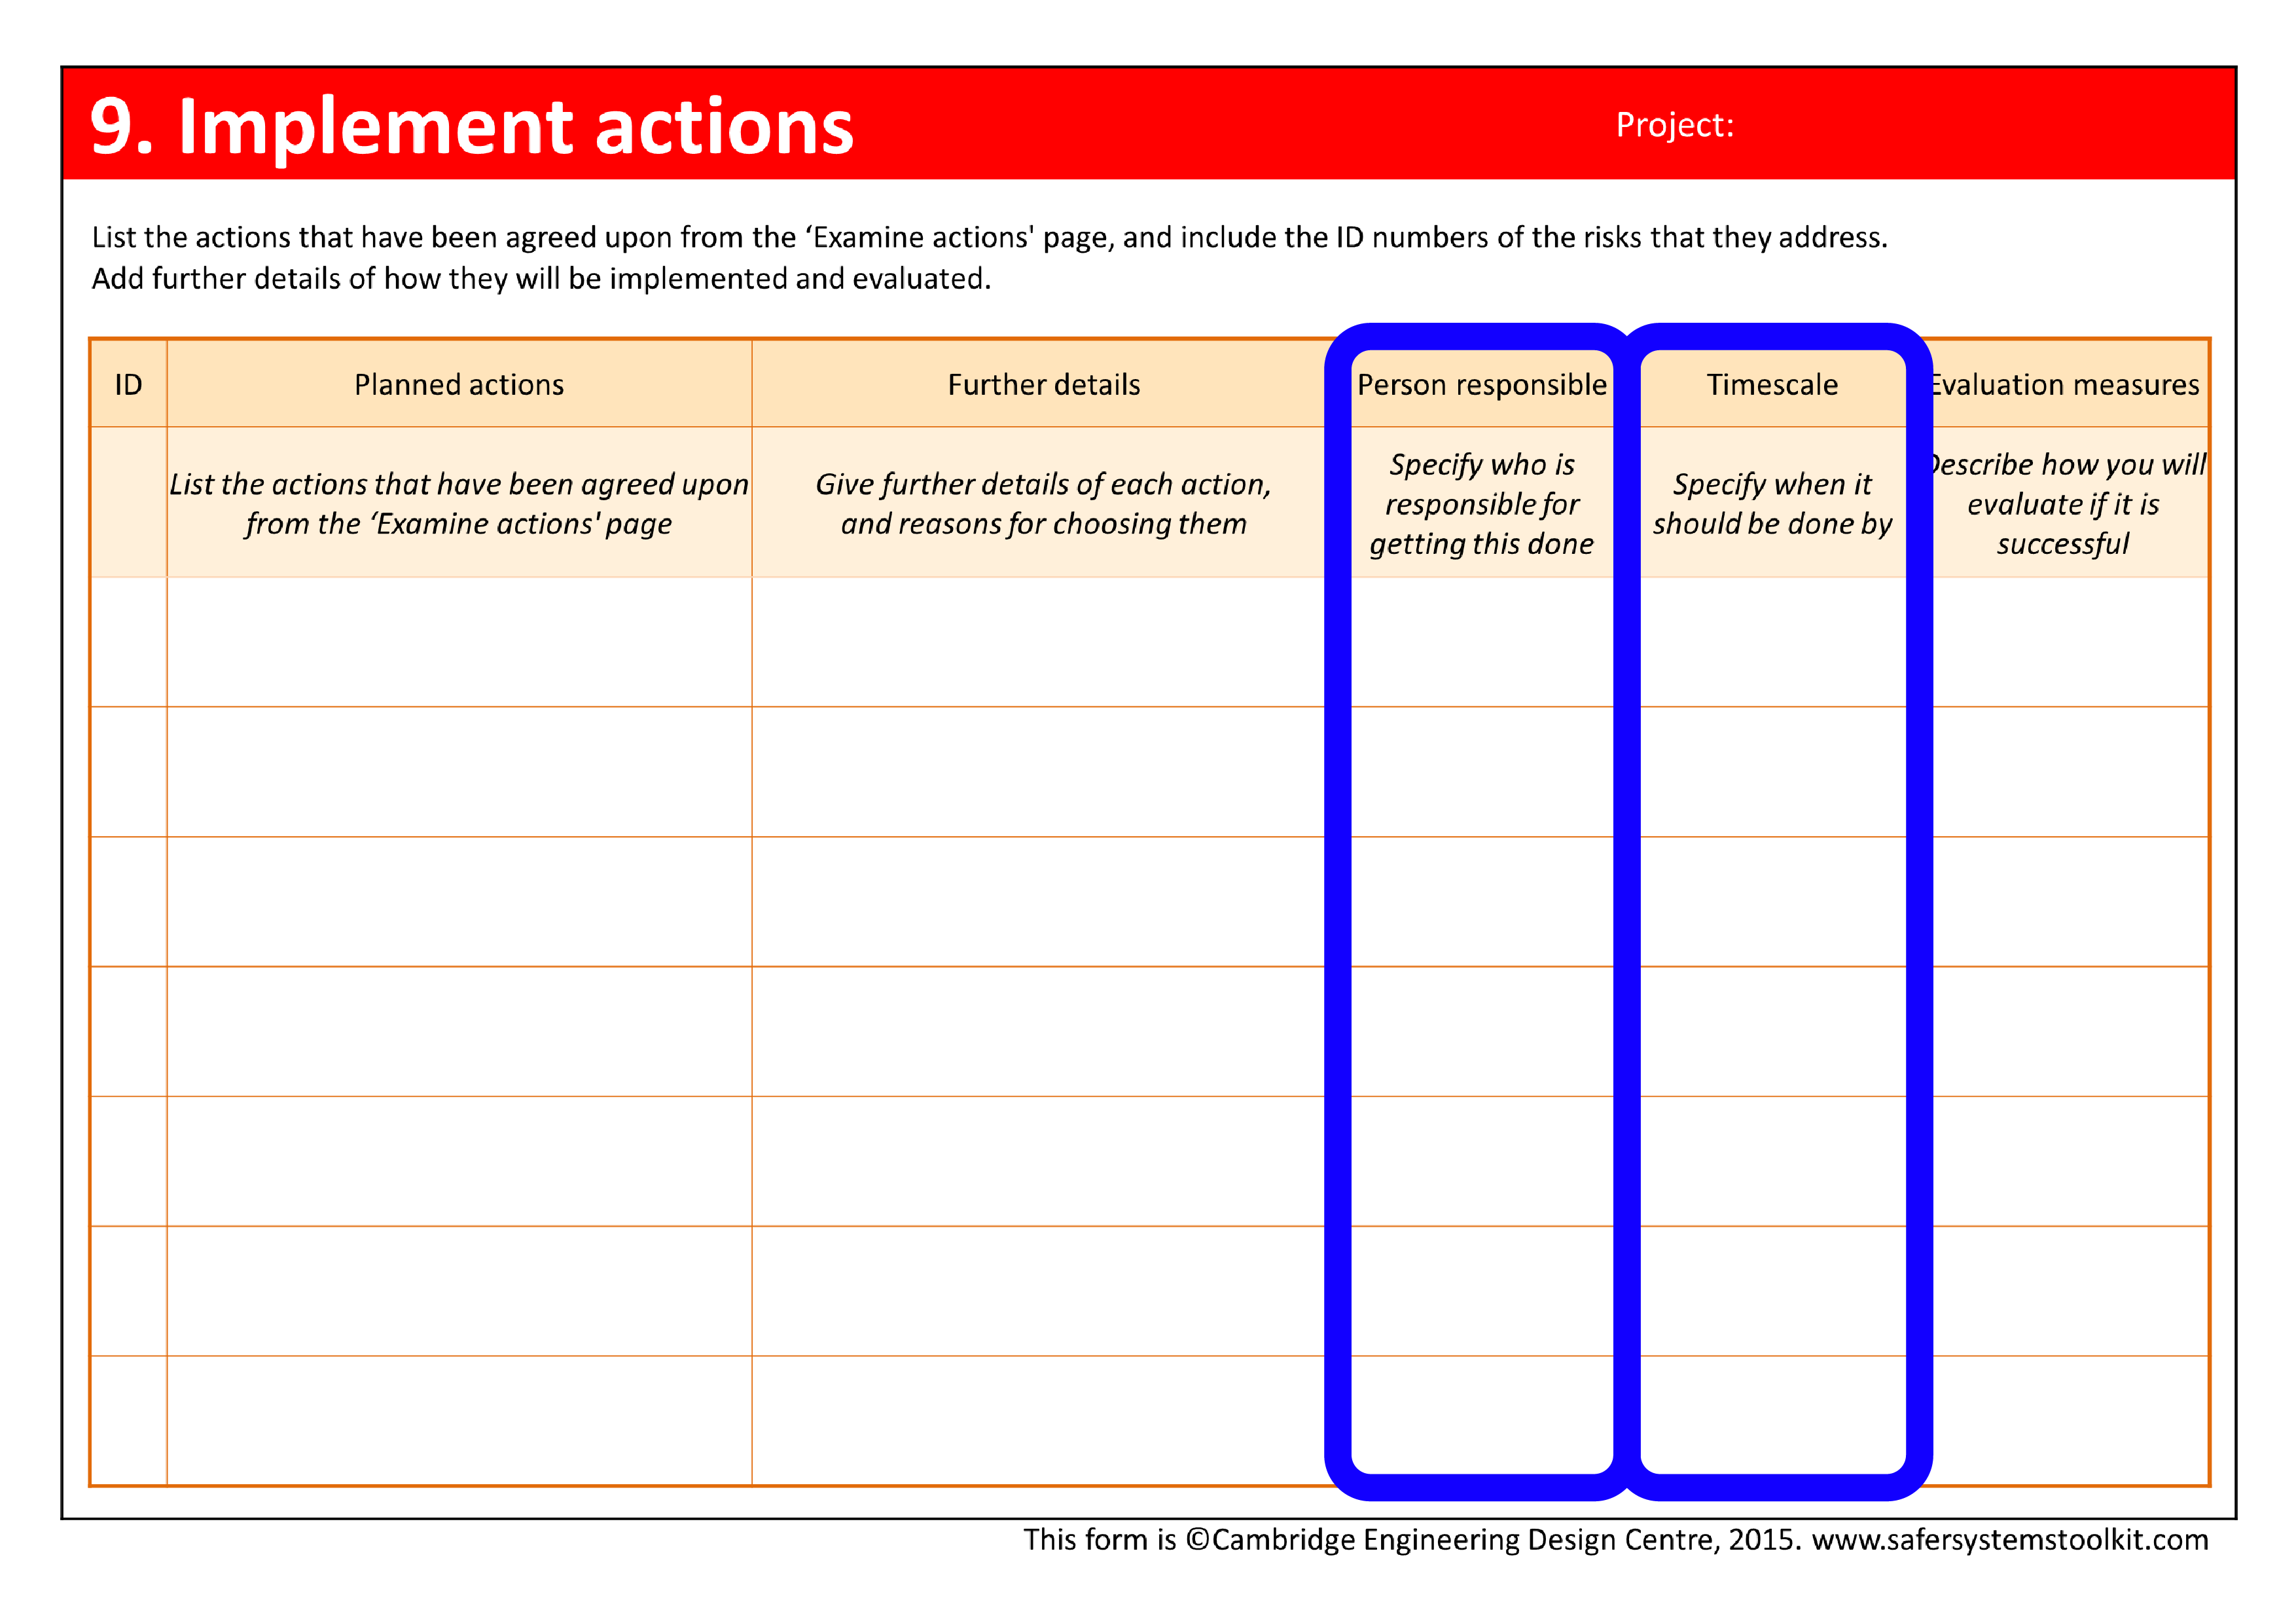 Screenshot of the Implement actions page of the assessment form